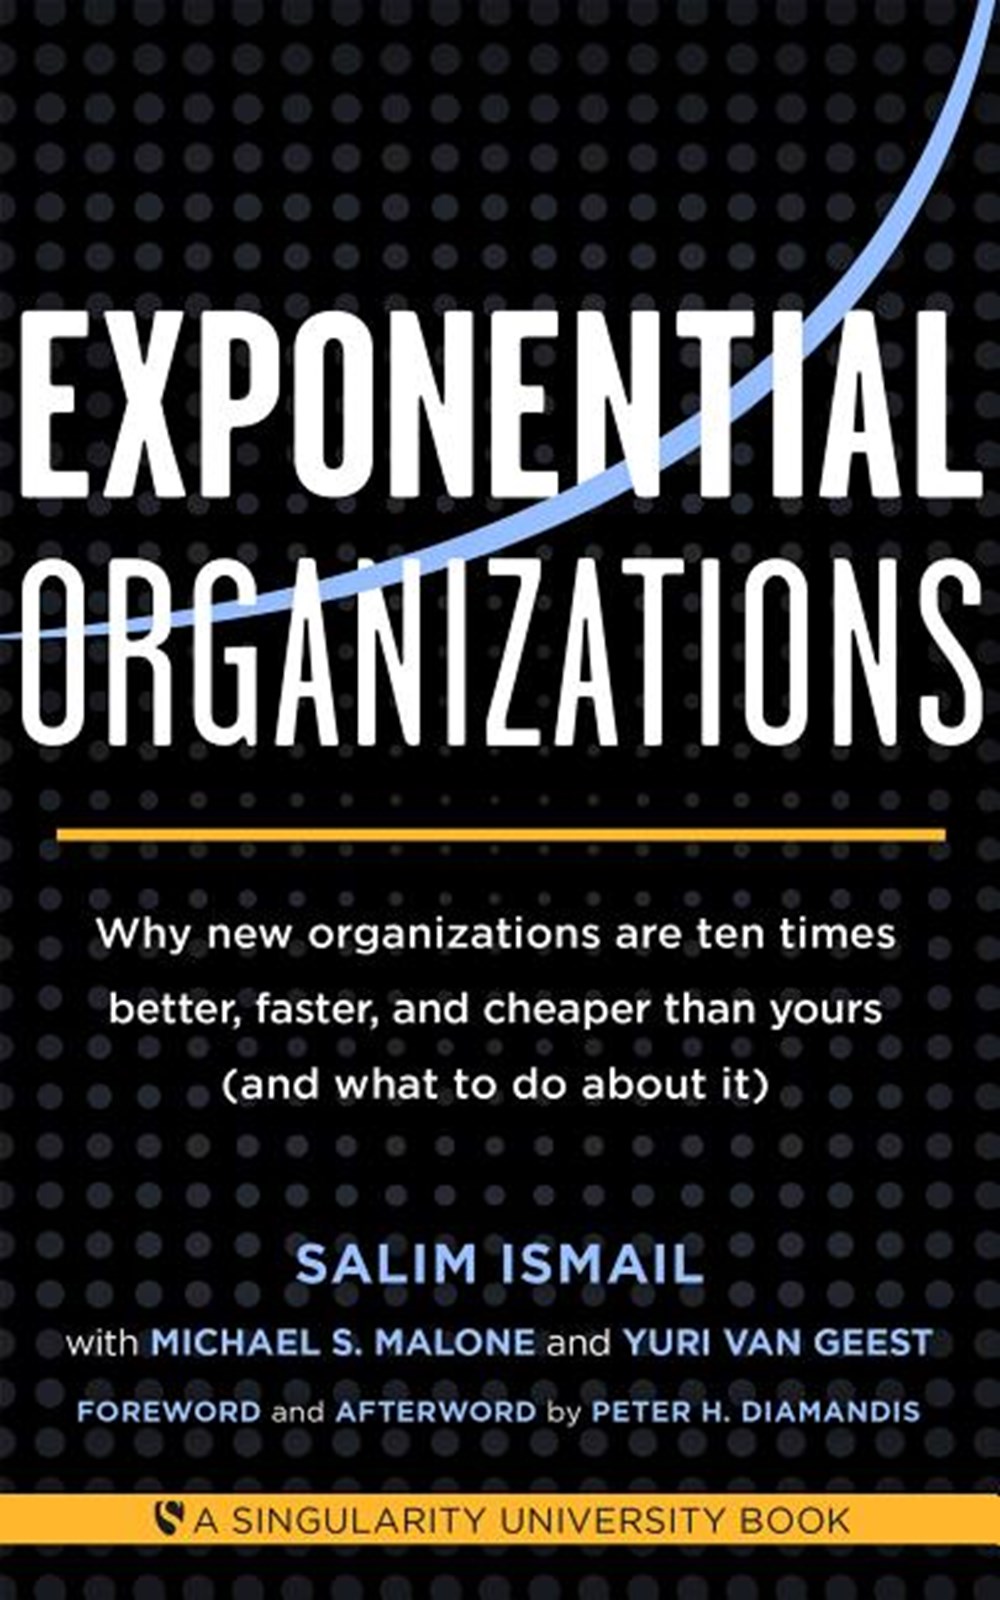 Exponential Organizations Why new organizations are ten times better, faster, and cheaper than yours